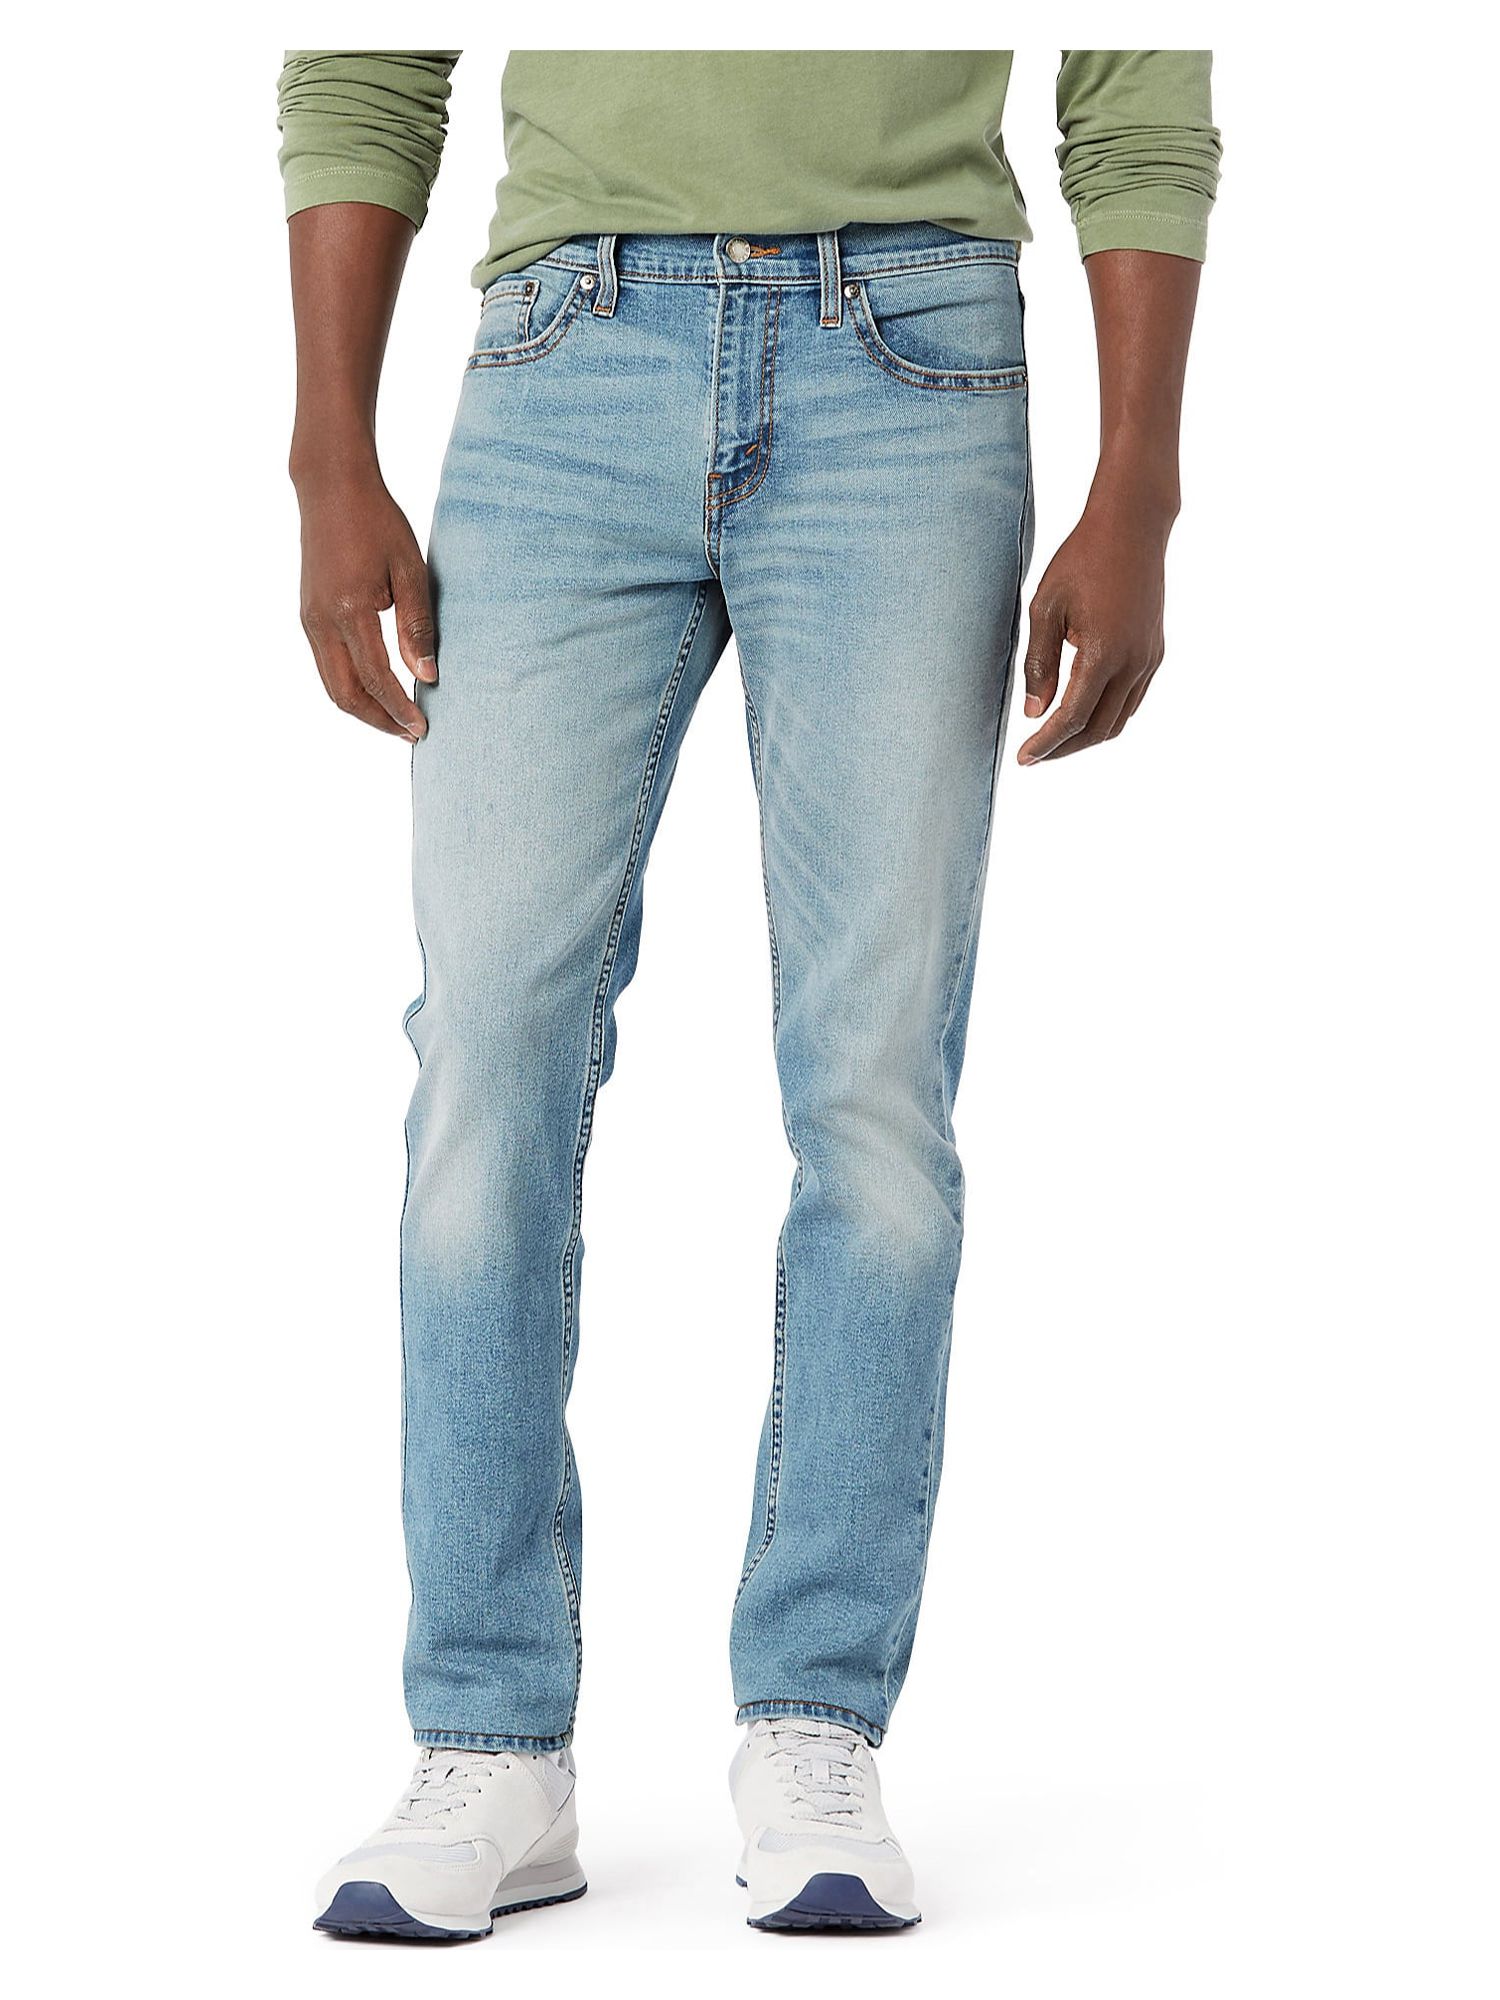 Signature by Levi Strauss & Co. Men’s and Big and Tall Slim Fit Jeans - image 1 of 5